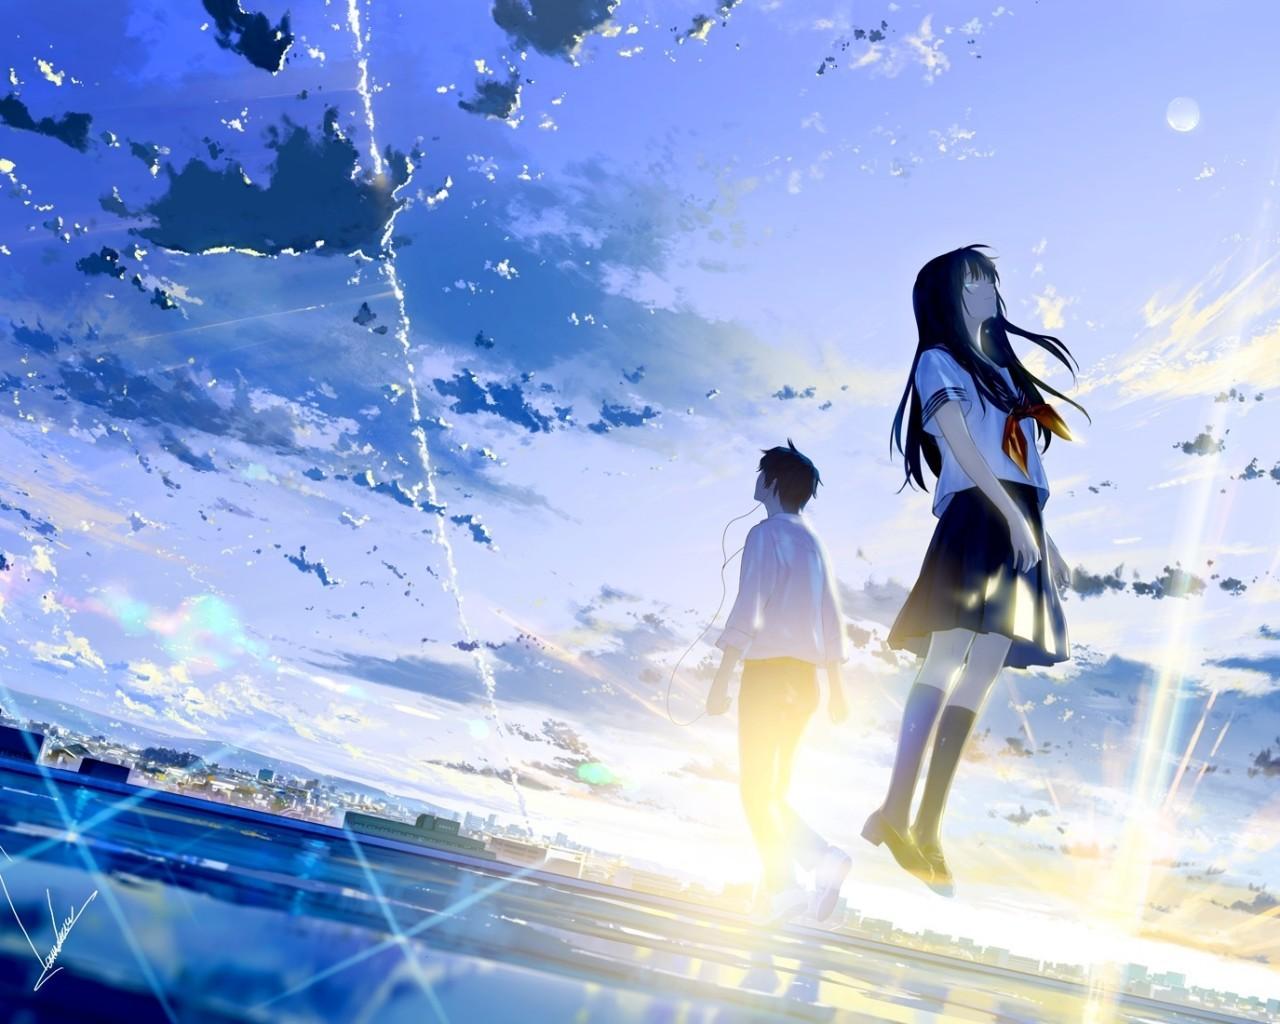 Anime Couple Tears Wallpapers - Wallpaper Cave